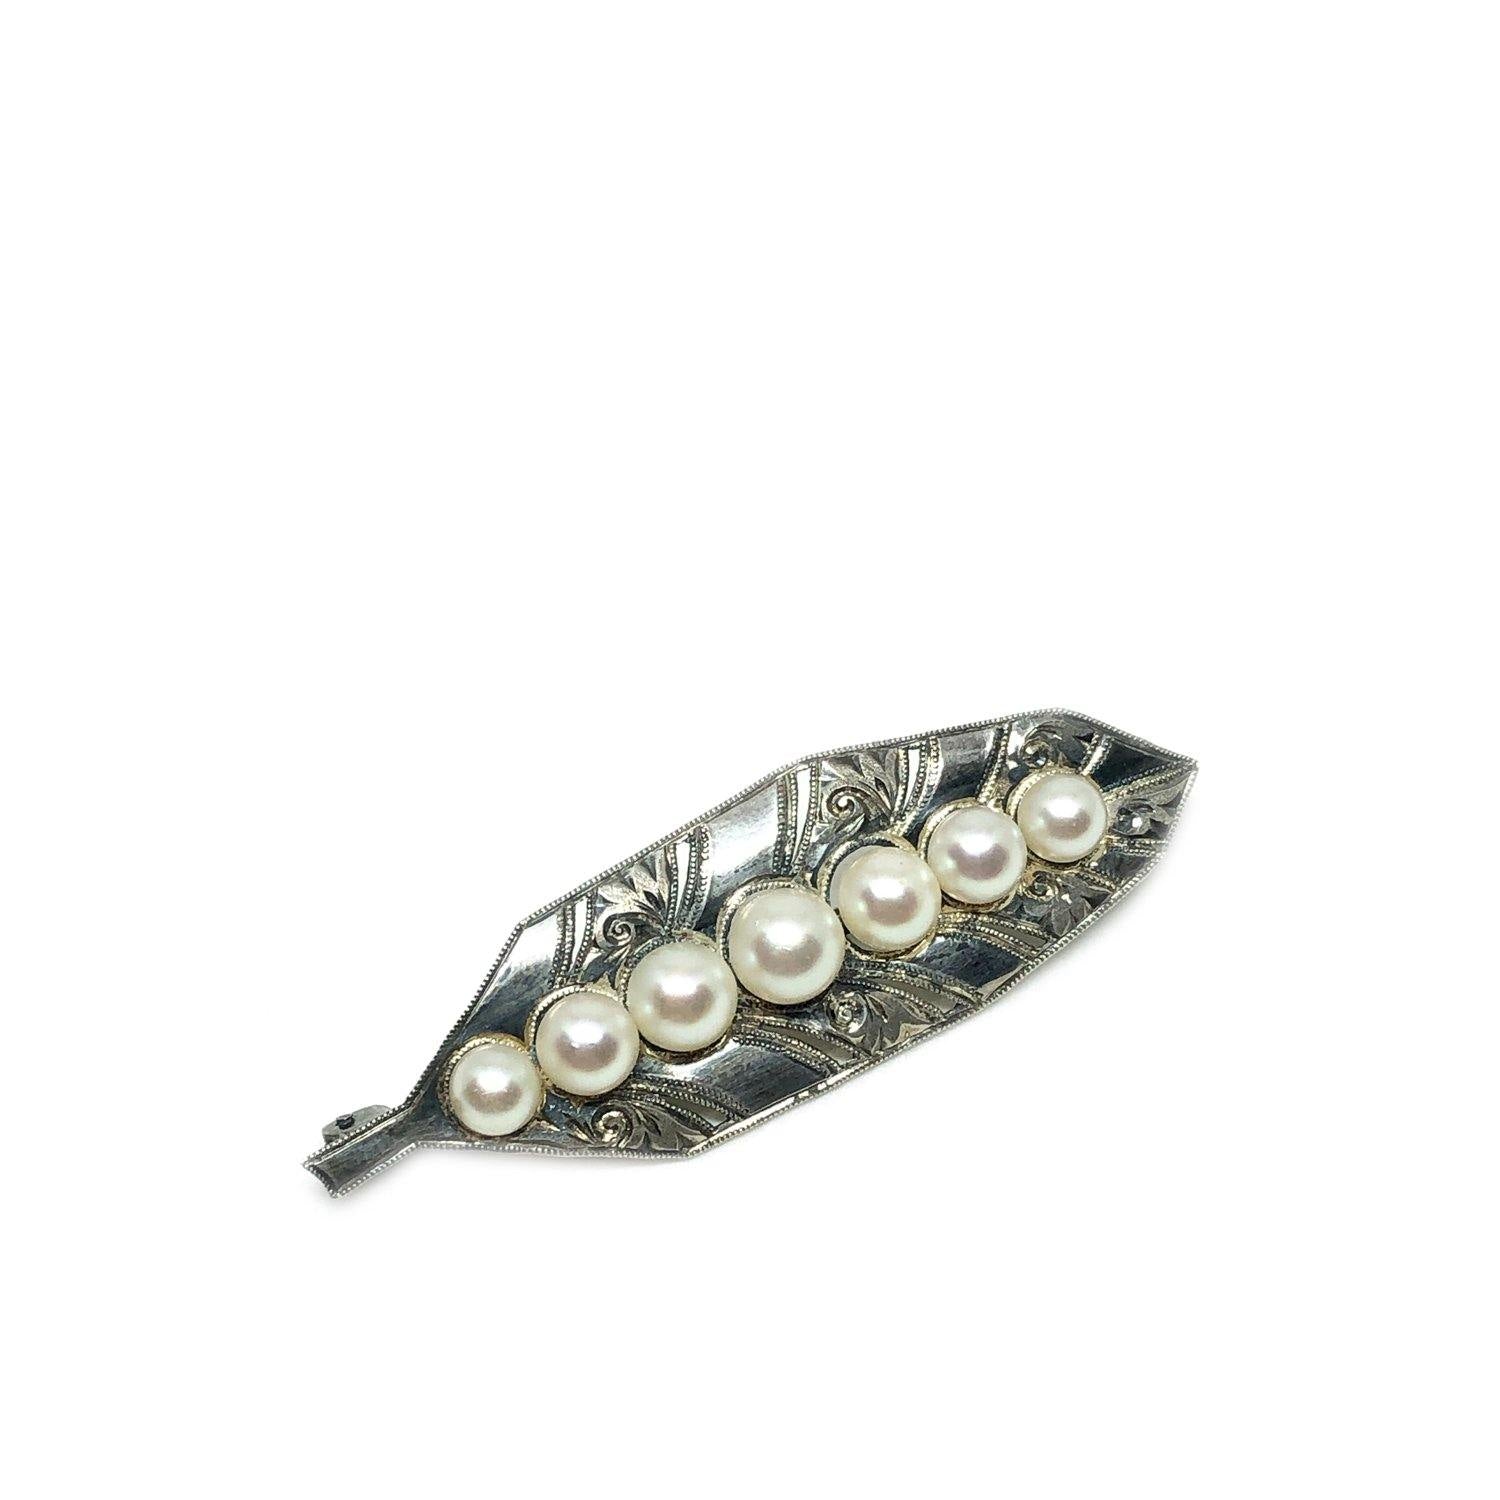 Engraved Nouveau Japanese Cultured Saltwater Akoya Pearl Brooch- Sterling Silver